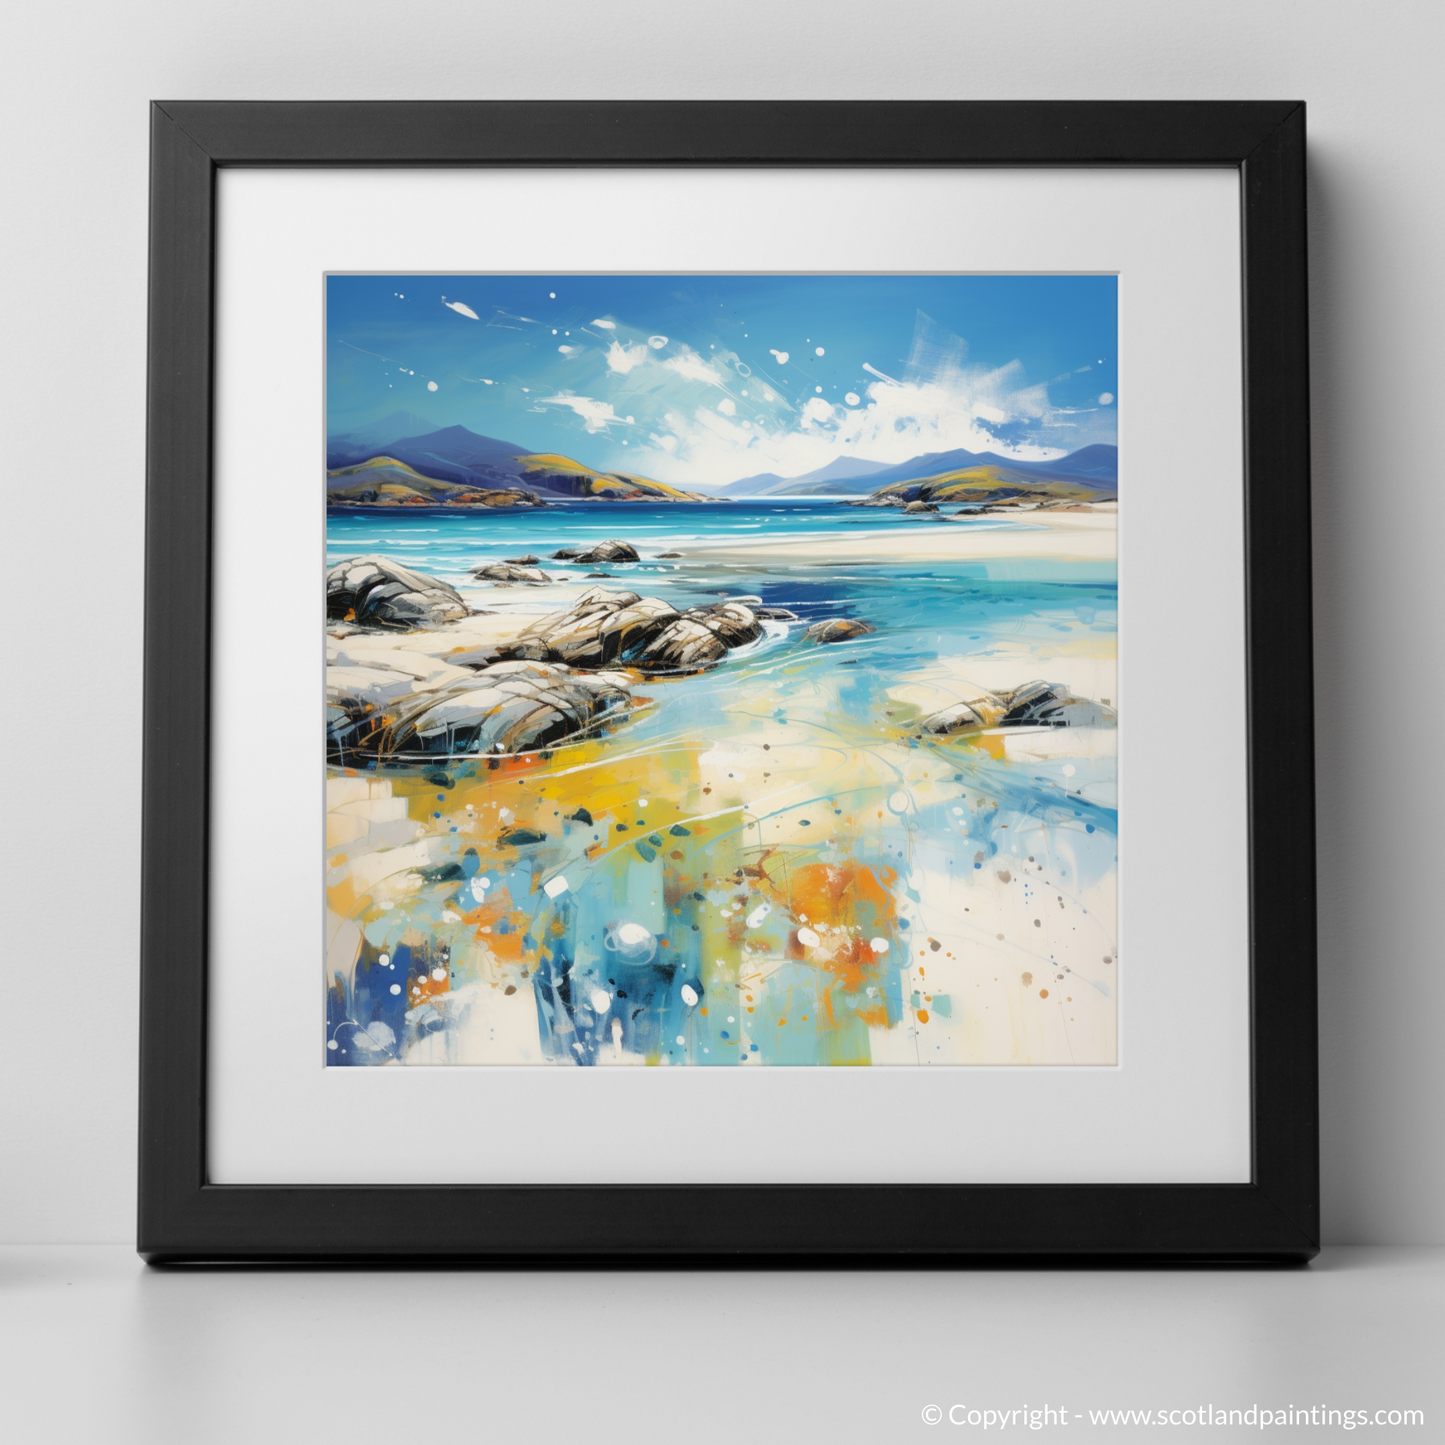 Painting and Art Print of Seilebost Beach, Isle of Harris in summer. Abstract Seaside Summer on Seilebost Beach.